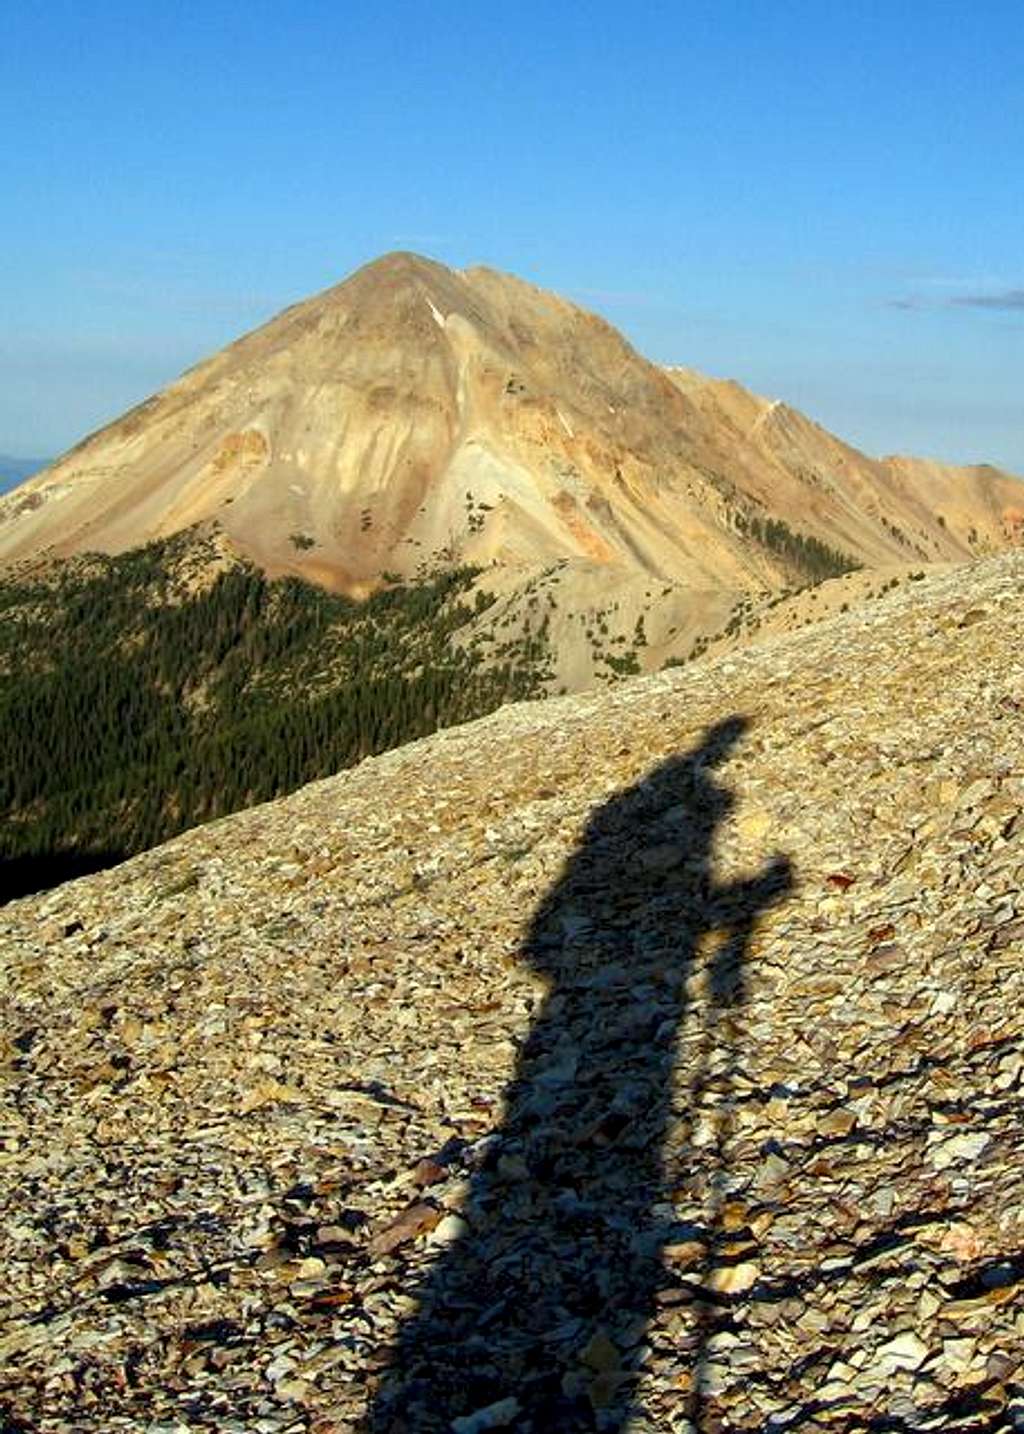 My shadow leading to Mount Baldy